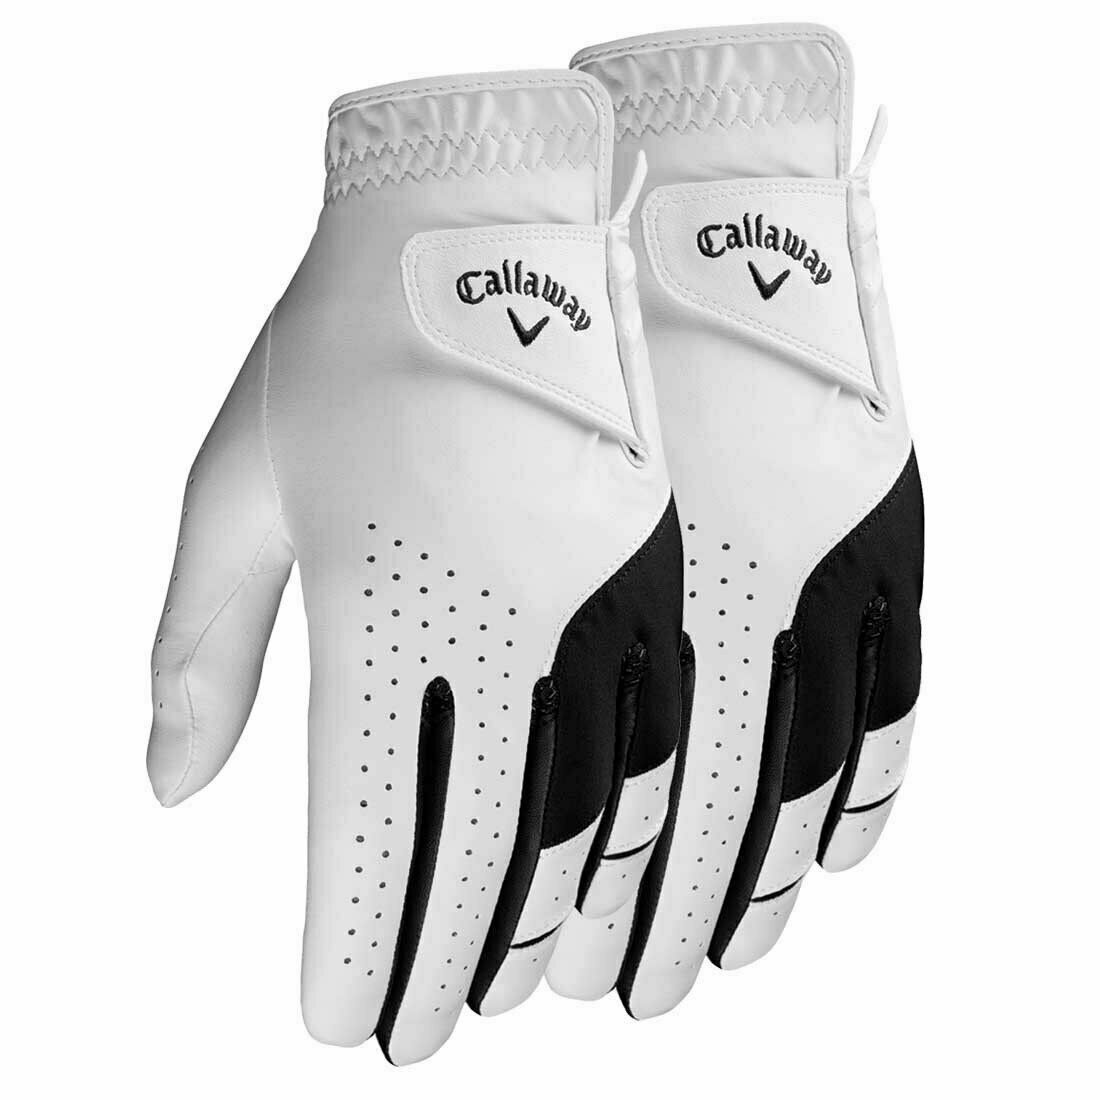 New Callaway 2-pack Weather Spann Men's Golf Gloves -pick Size-free Shipping